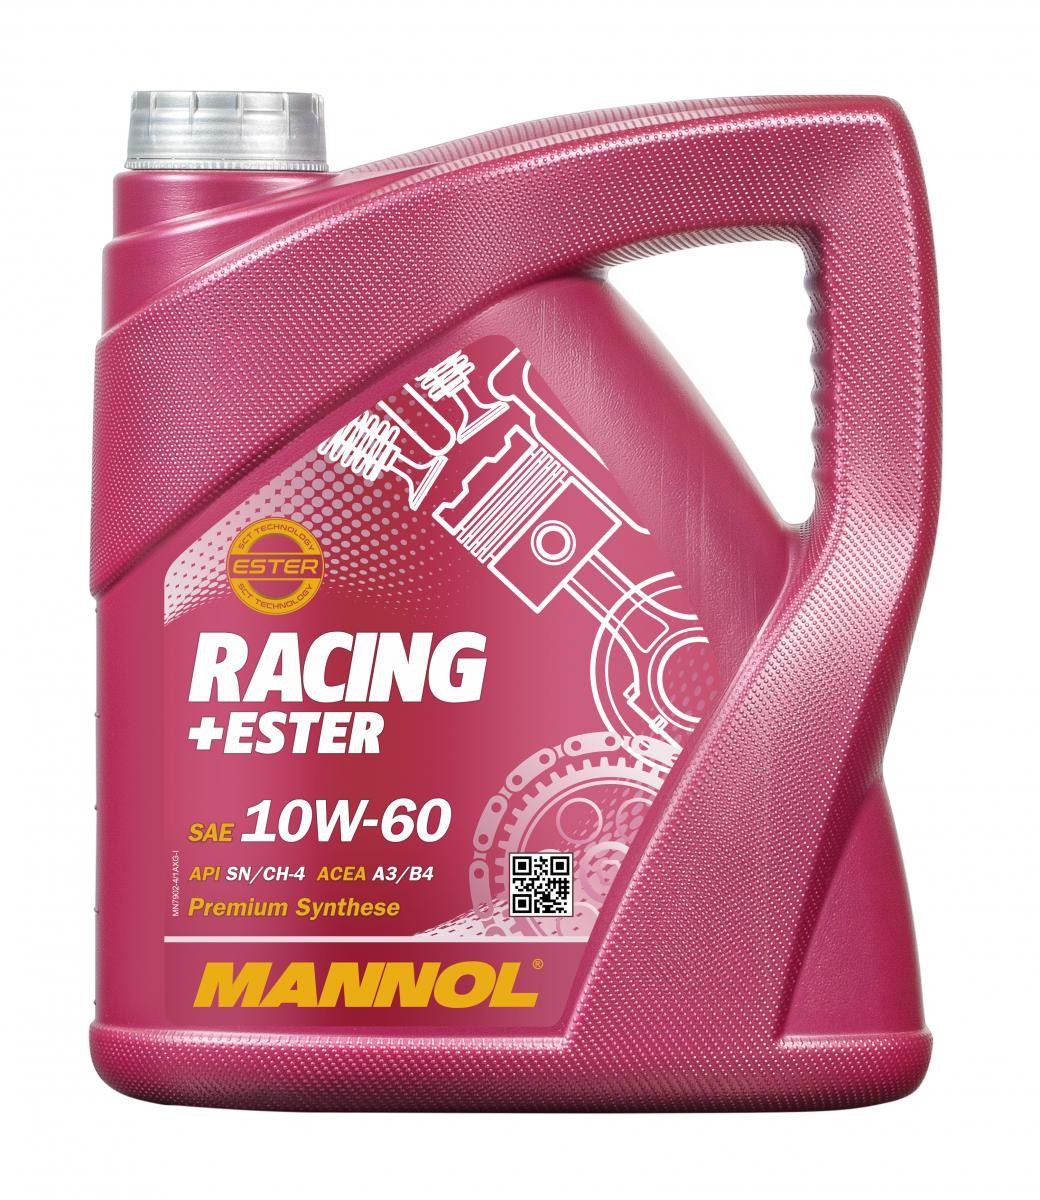 MANNOL RACING+ESTER 10W-60, 4l, Synthetic Oil Motor oil MN7902-4 buy